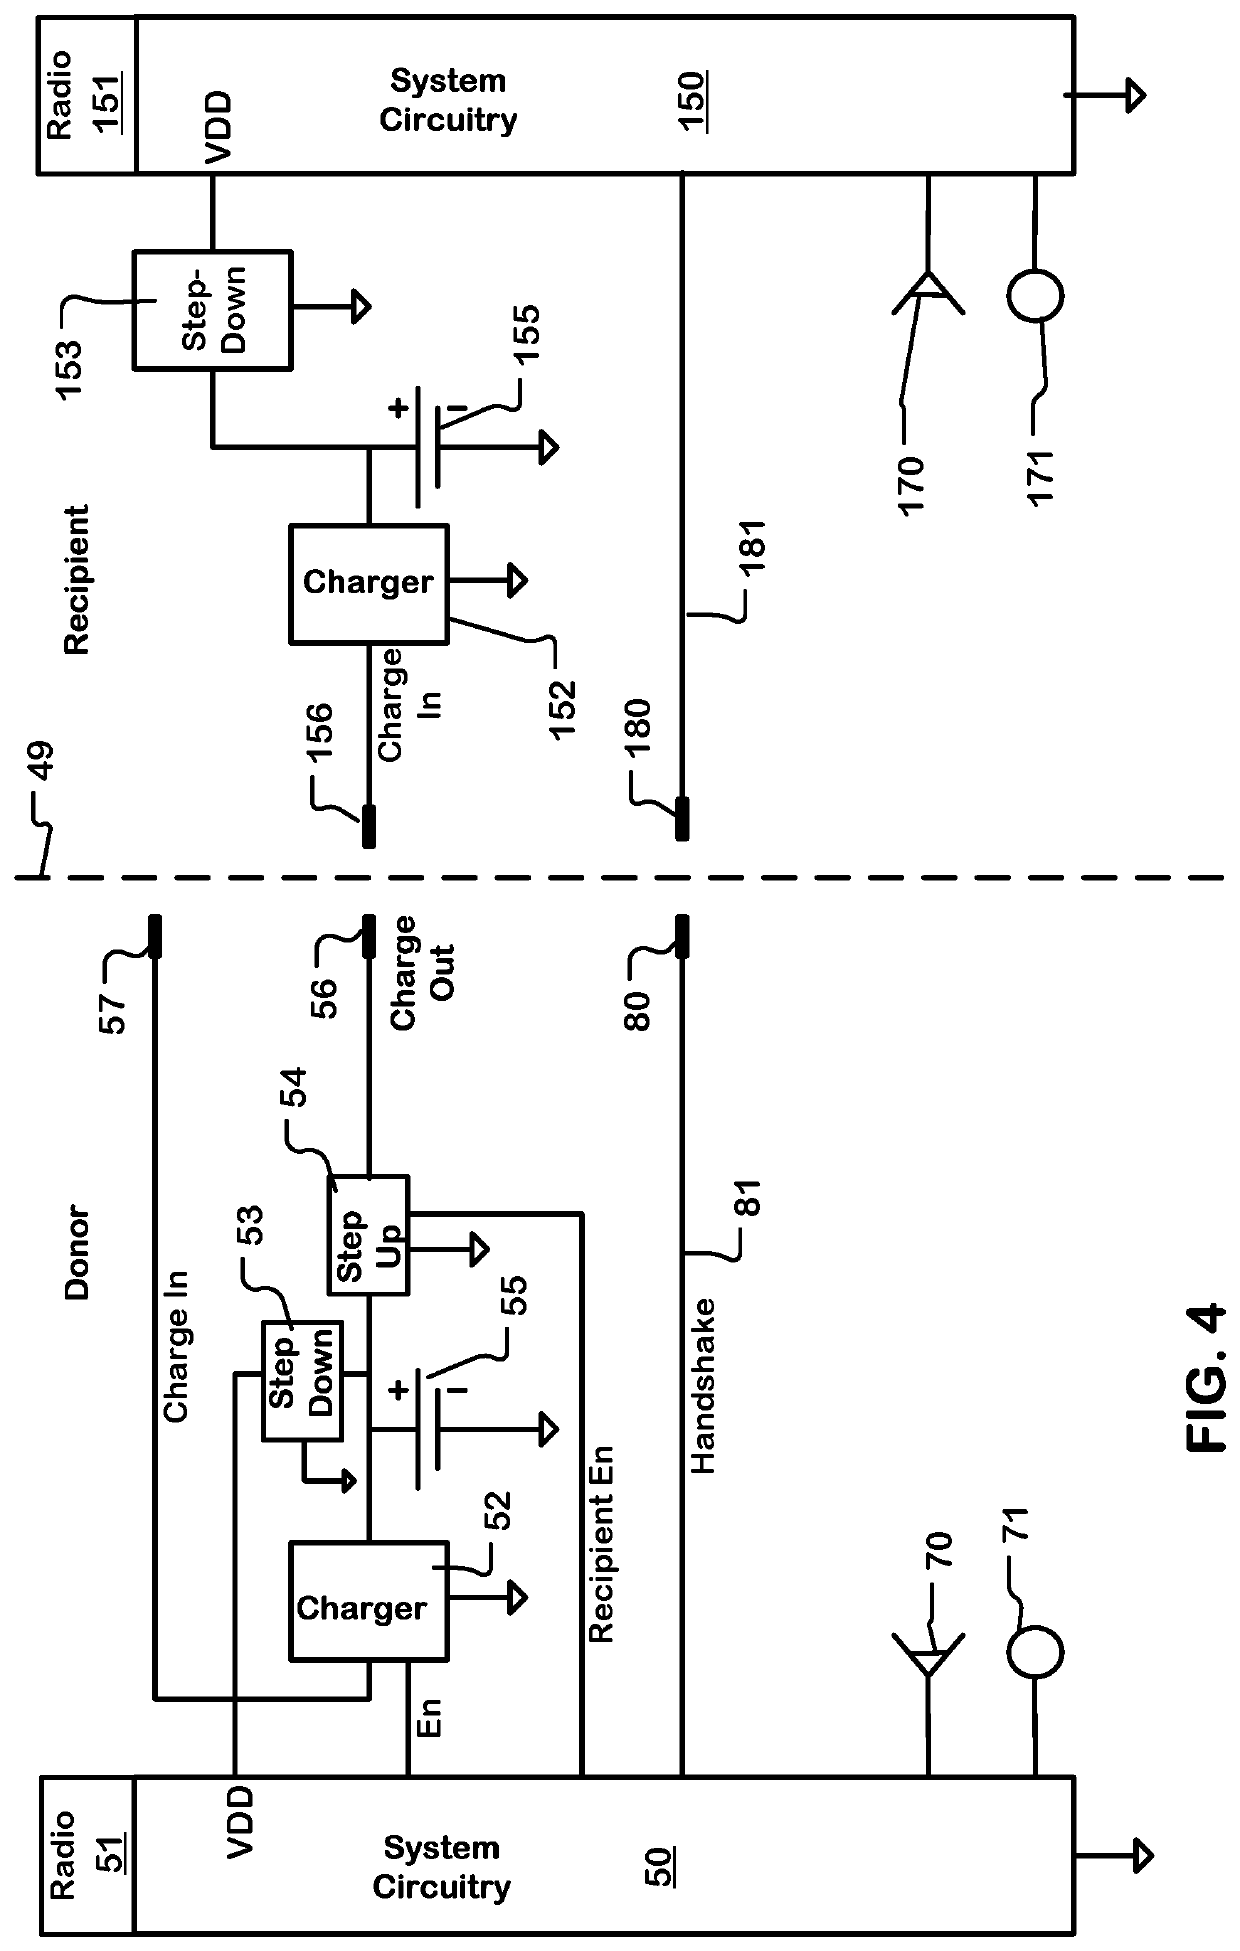 Transfer of Battery Charge from Donor to Recipient Appliance